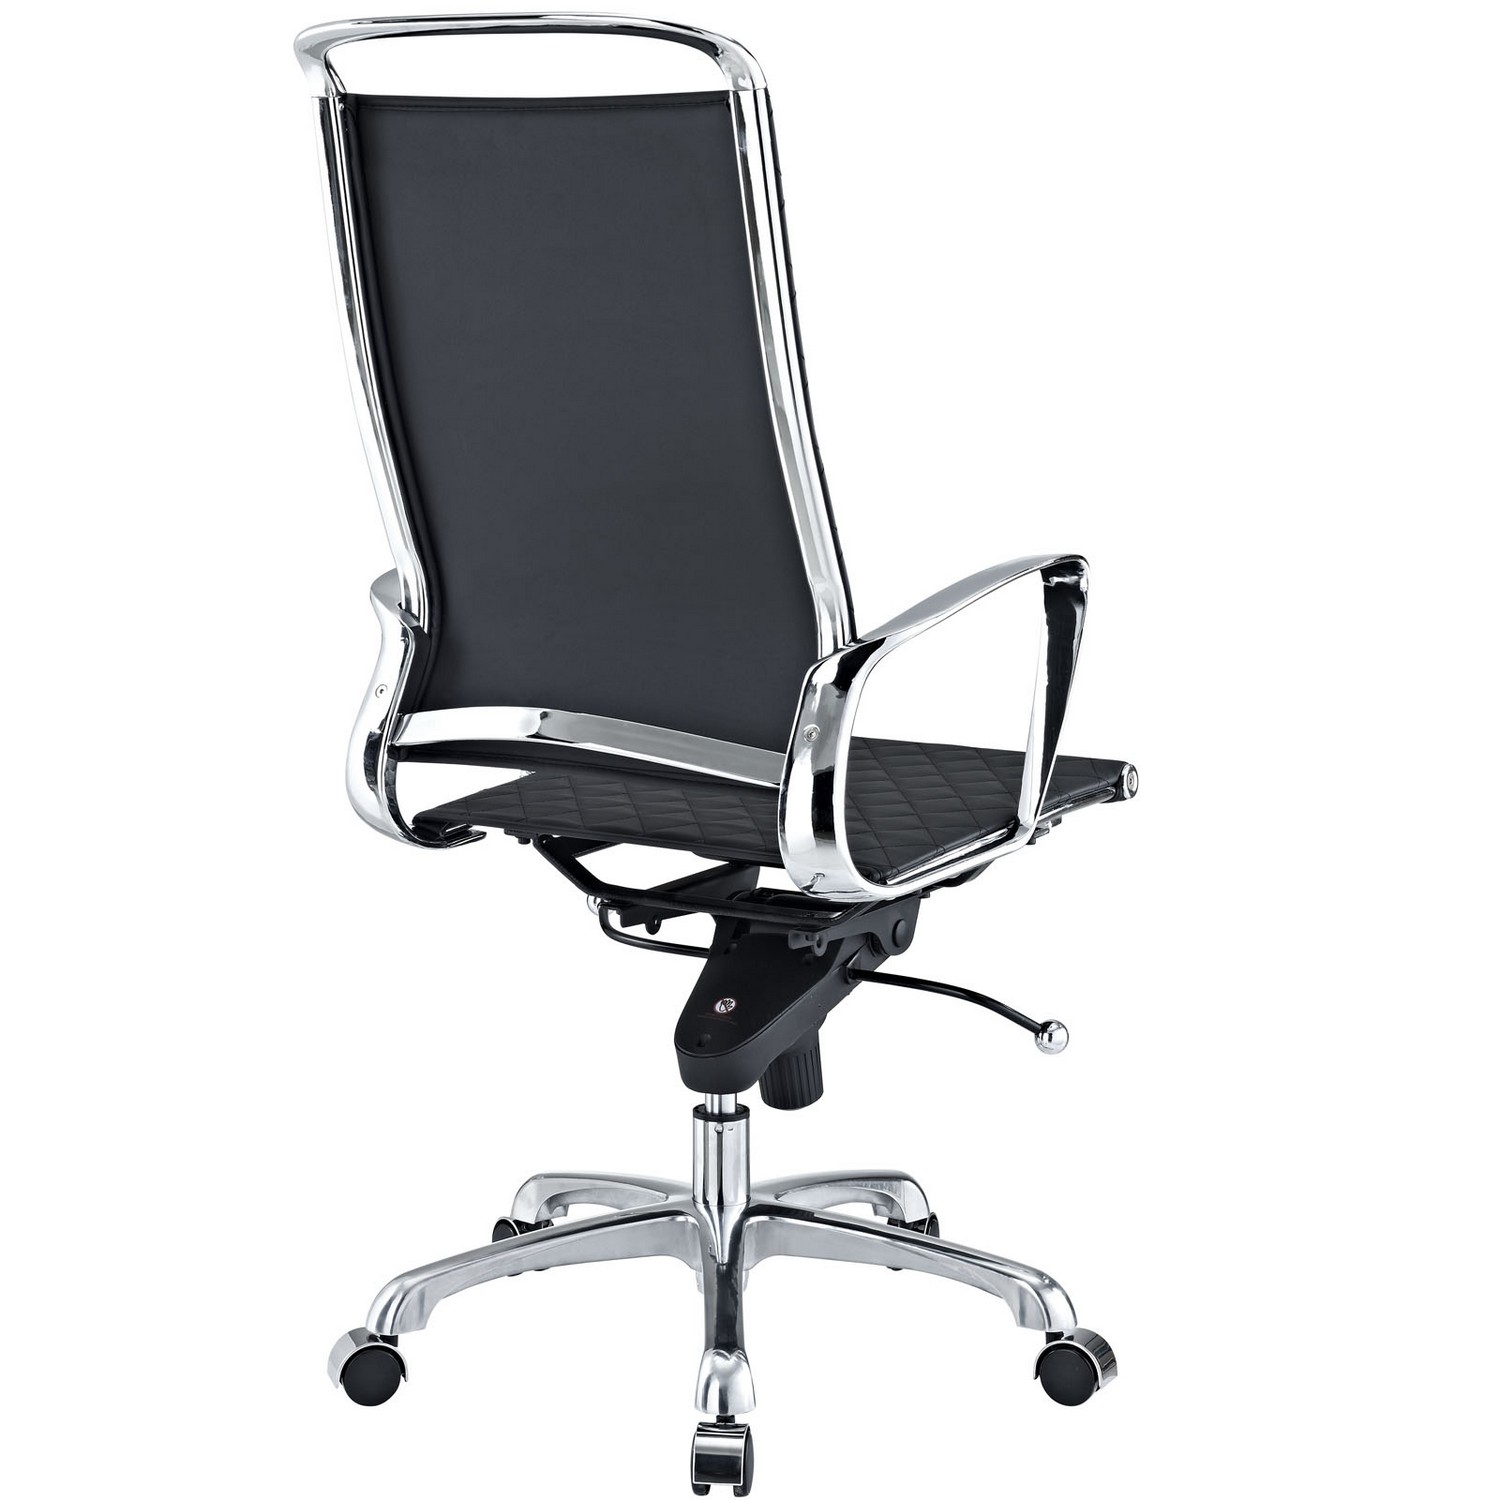 Modway Vibe Highback Office Chair - Black